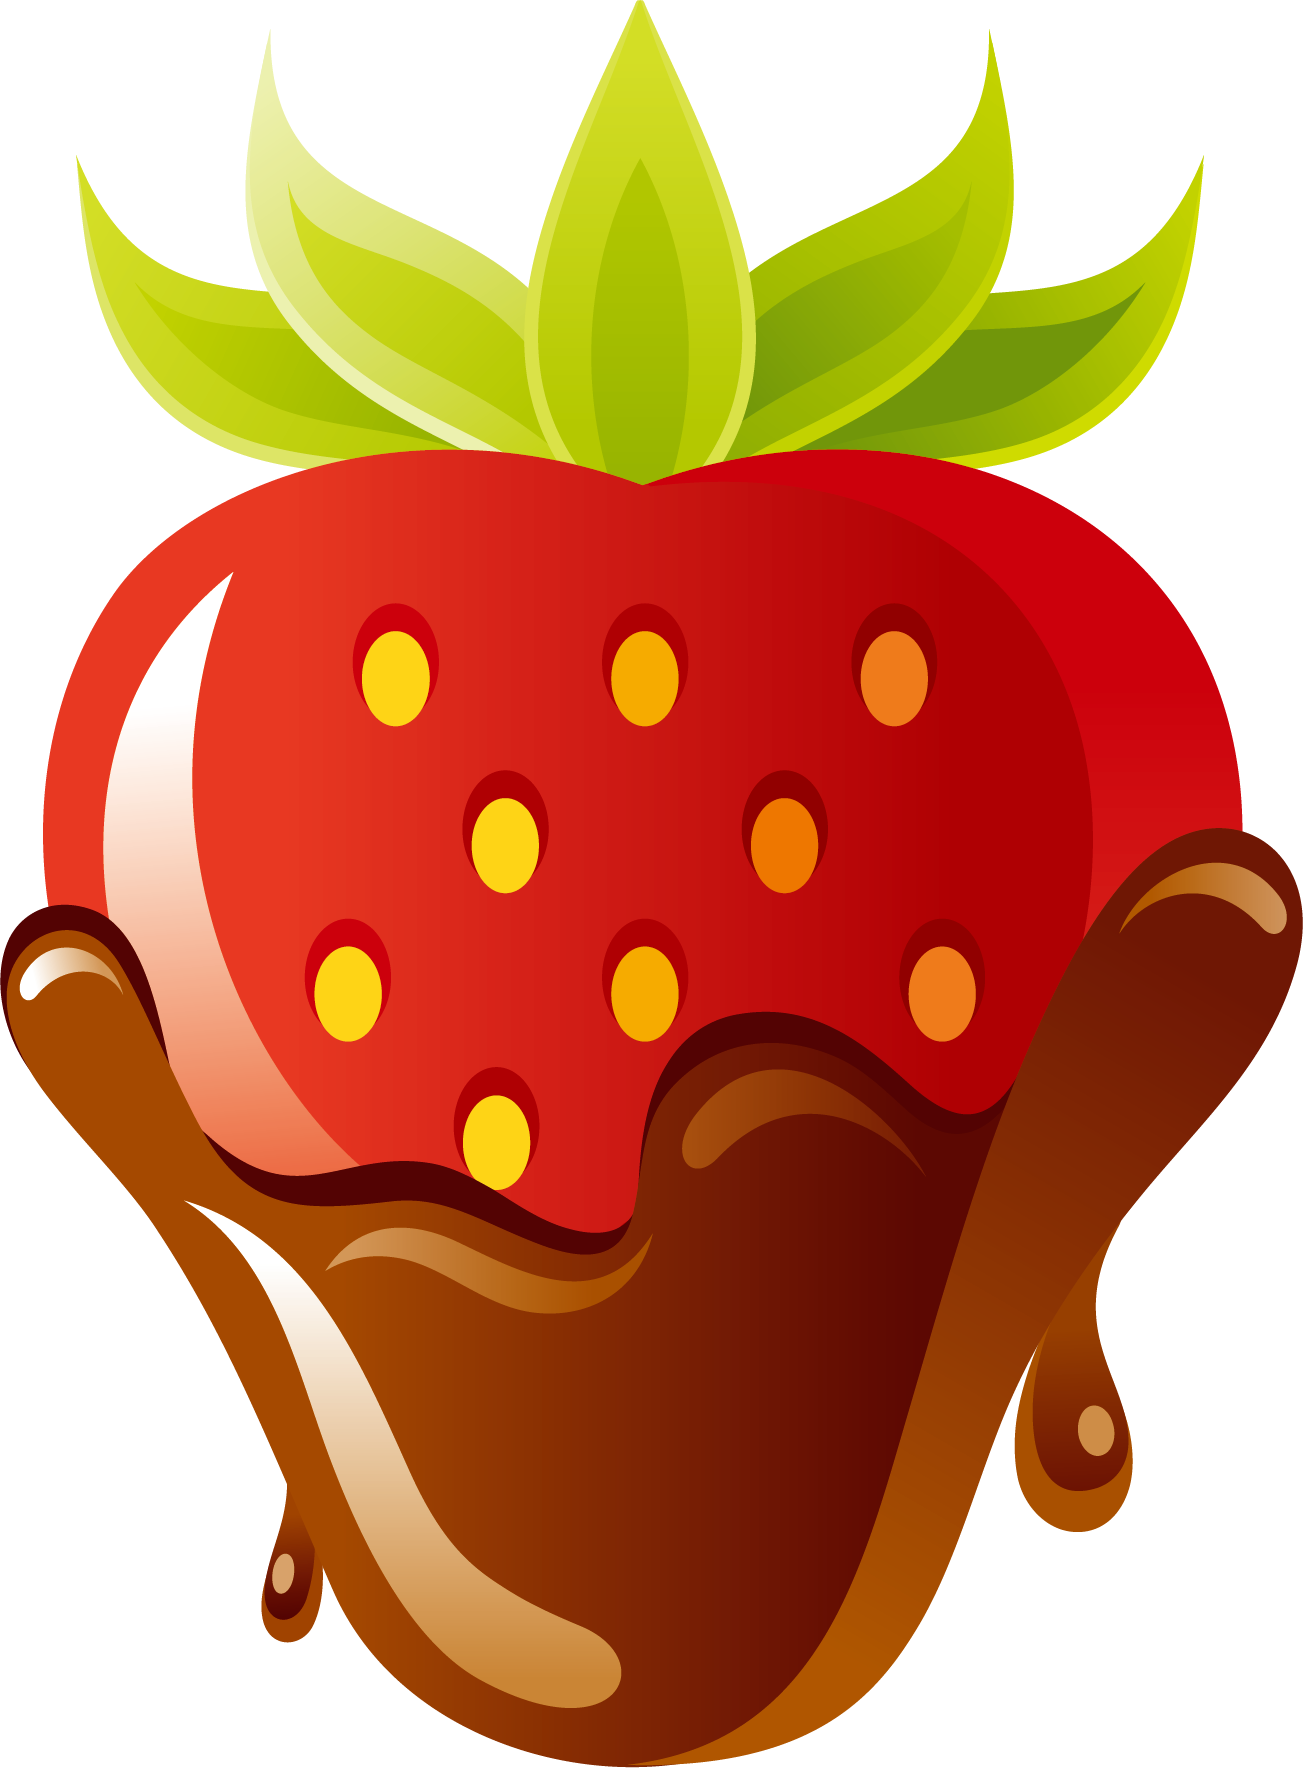 Chocolate Covered Fruit Royalty Free - سكرابز فراوله (1303x1768)